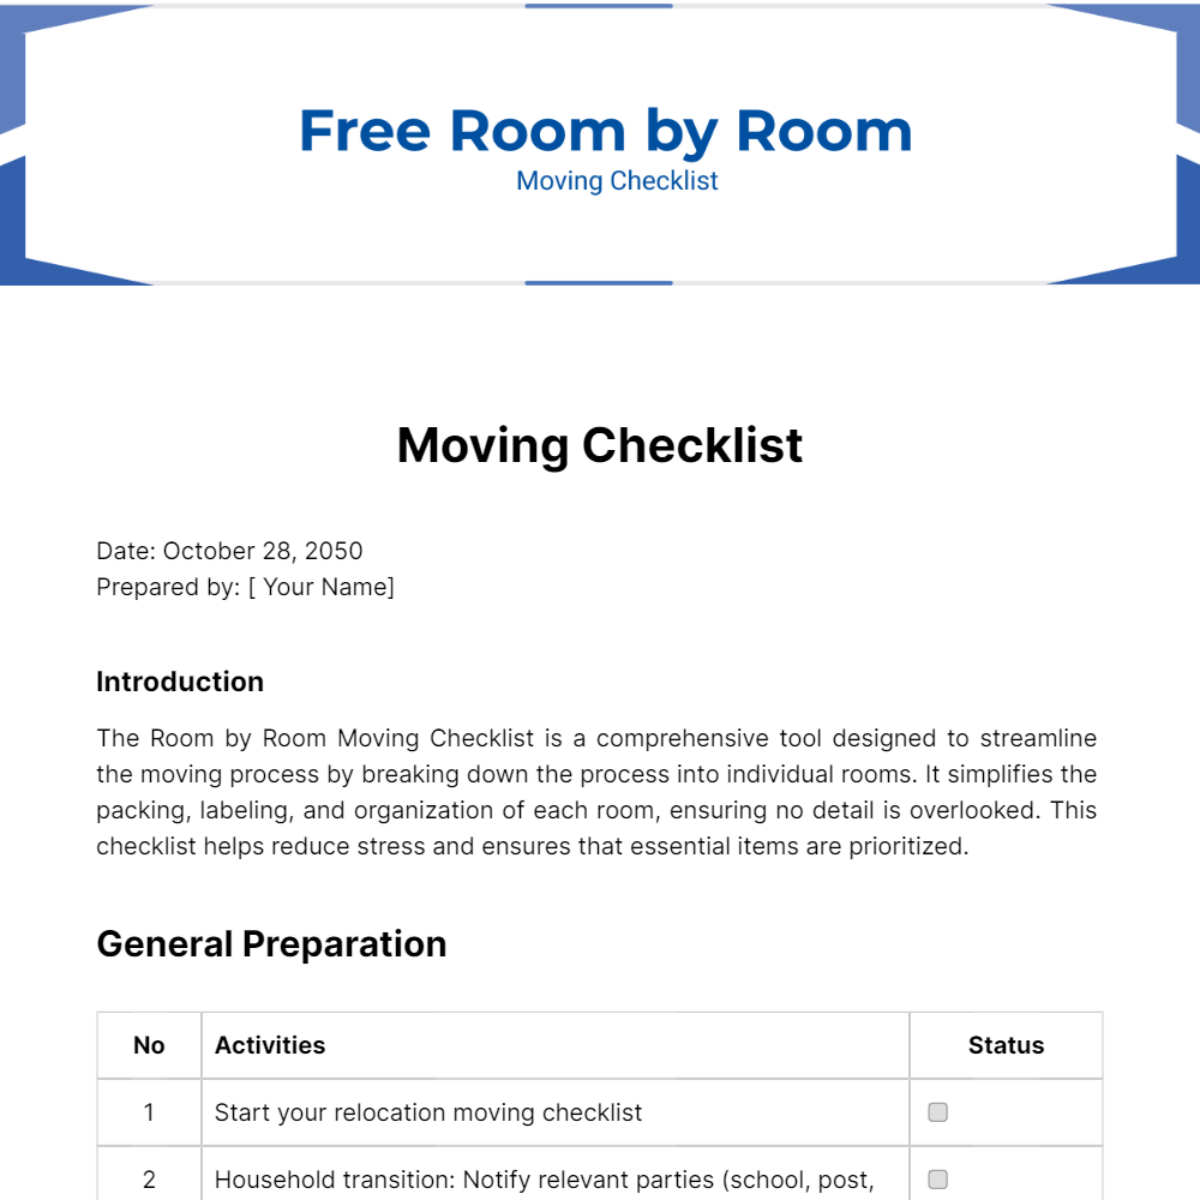 Free Room by Room Moving Checklist Template